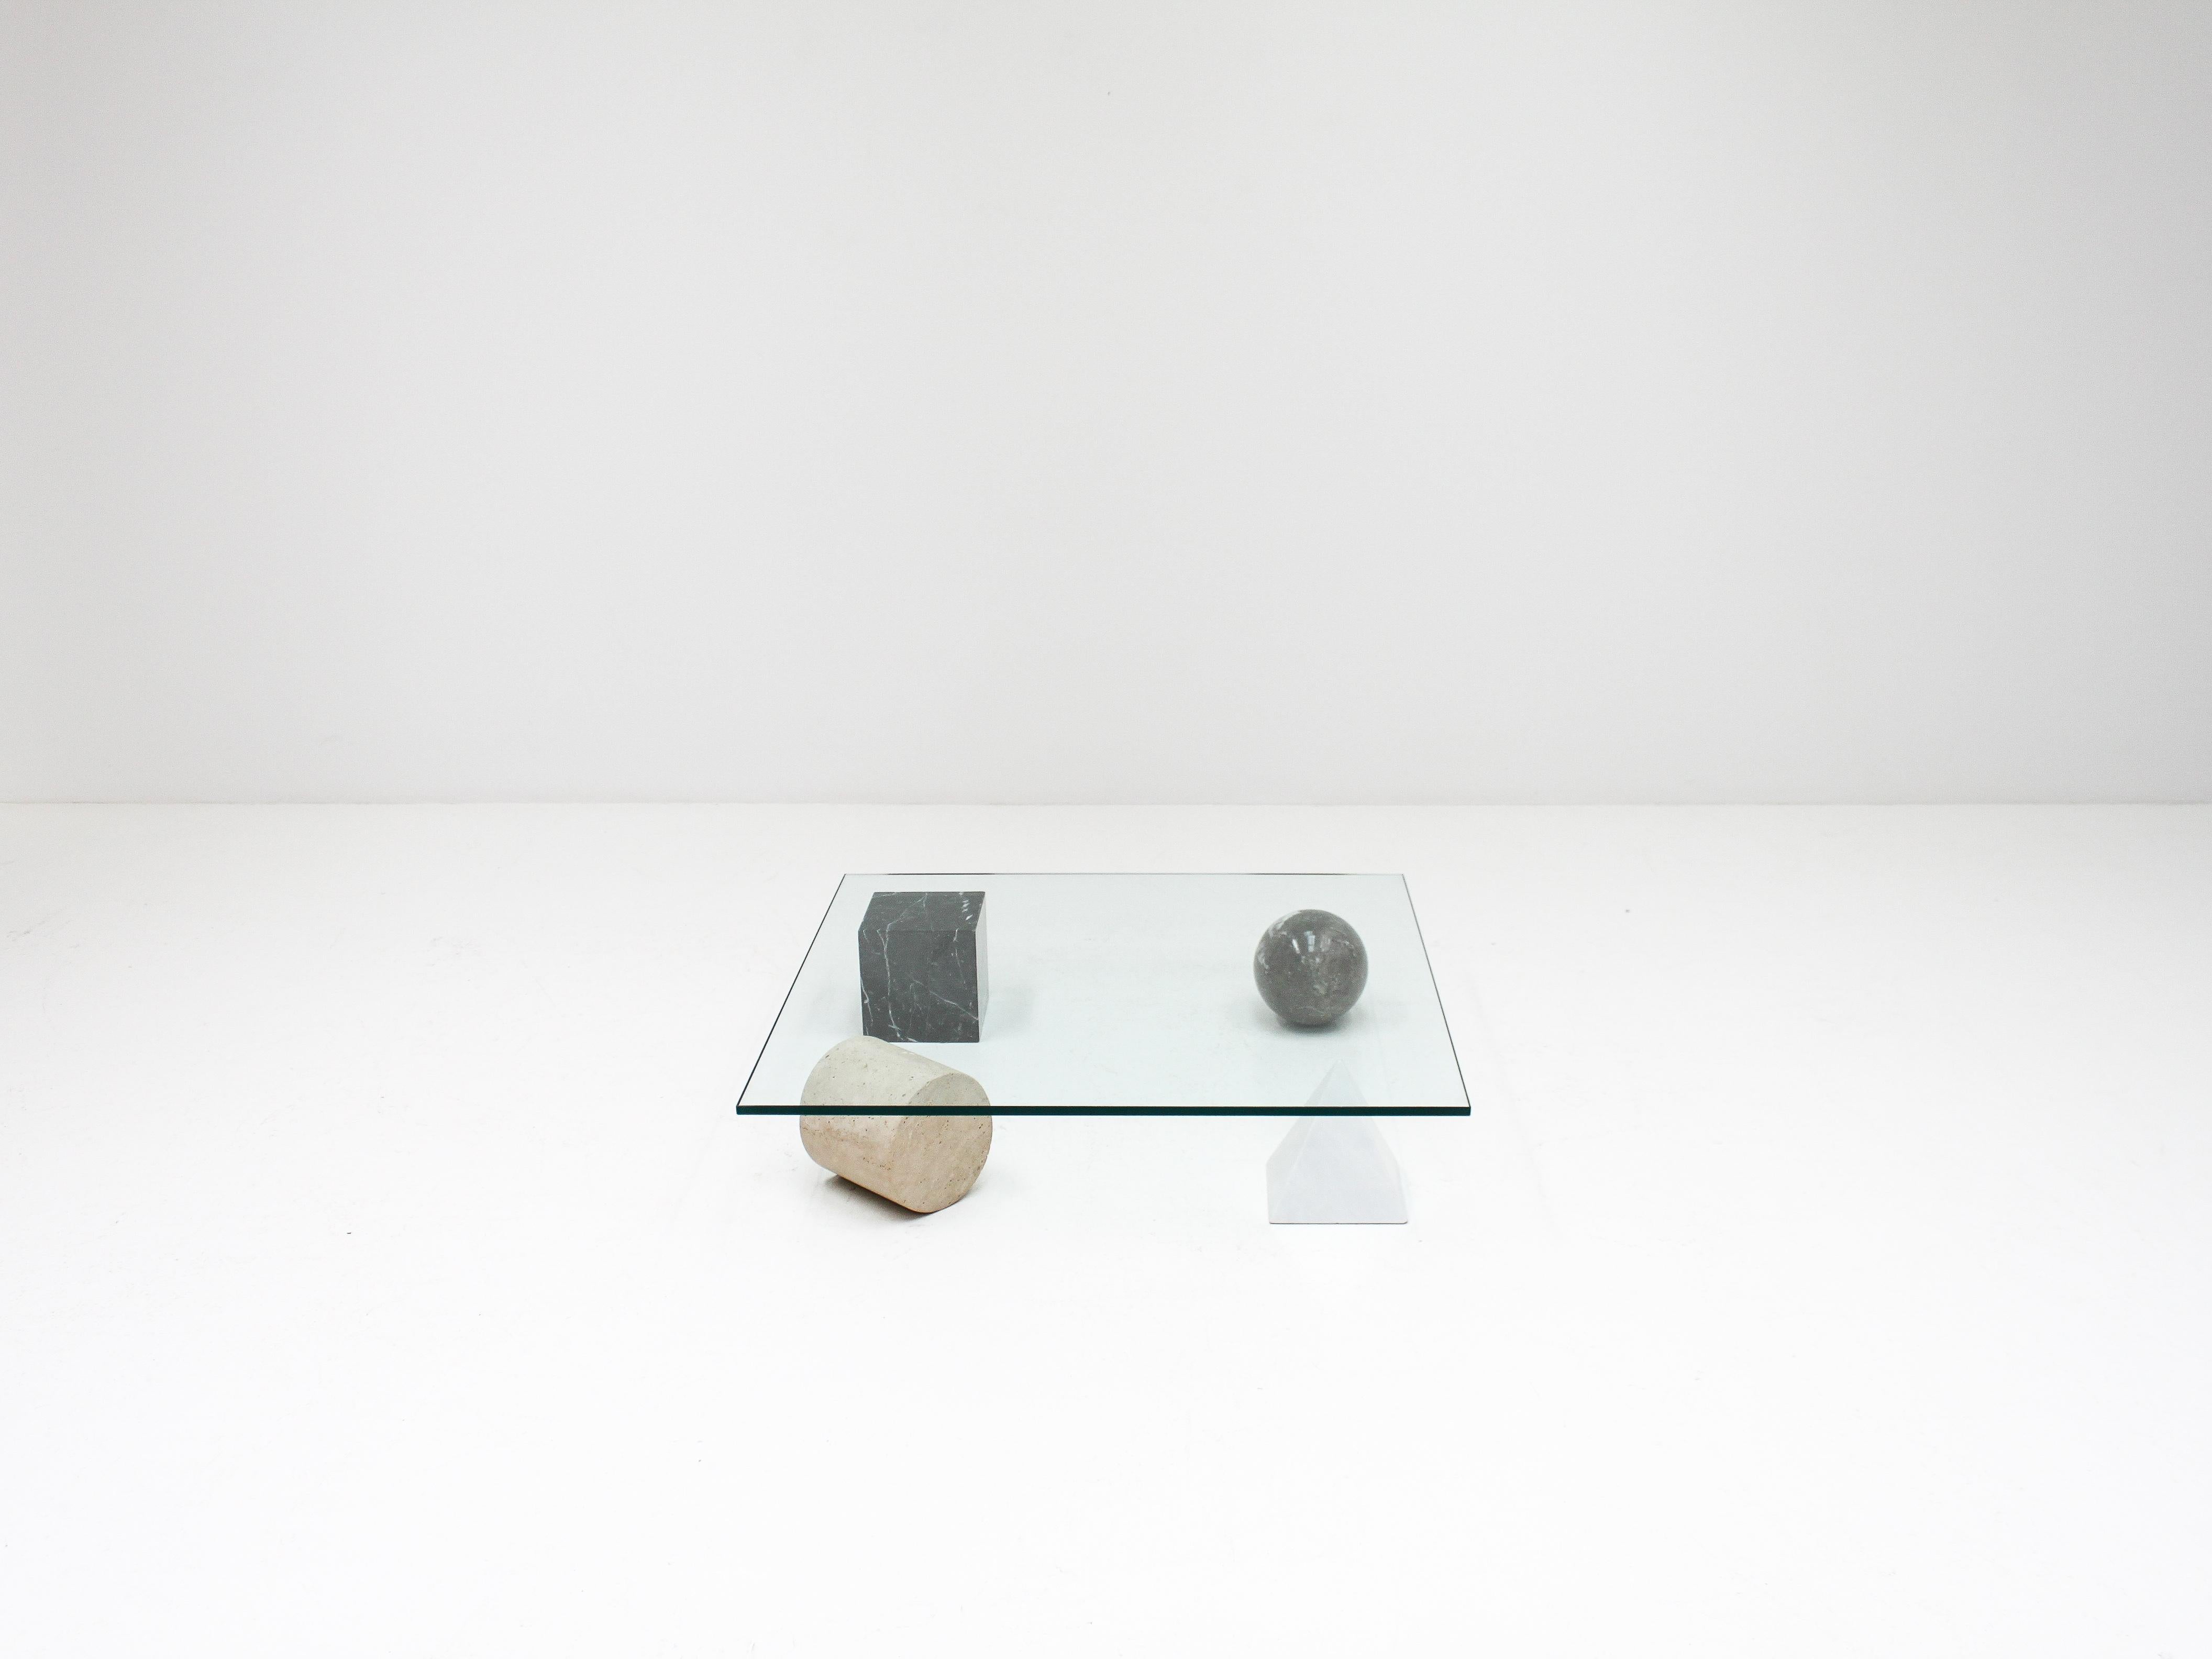 A ‘Metafora’ coffee table by Massimo and Lella Vignelli for Casigliani, Italy. 

Constructed of four geometric marble shapes which form the base including a solid Carrara marble pyramid, travertine cylinder, black marble block and granite sphere